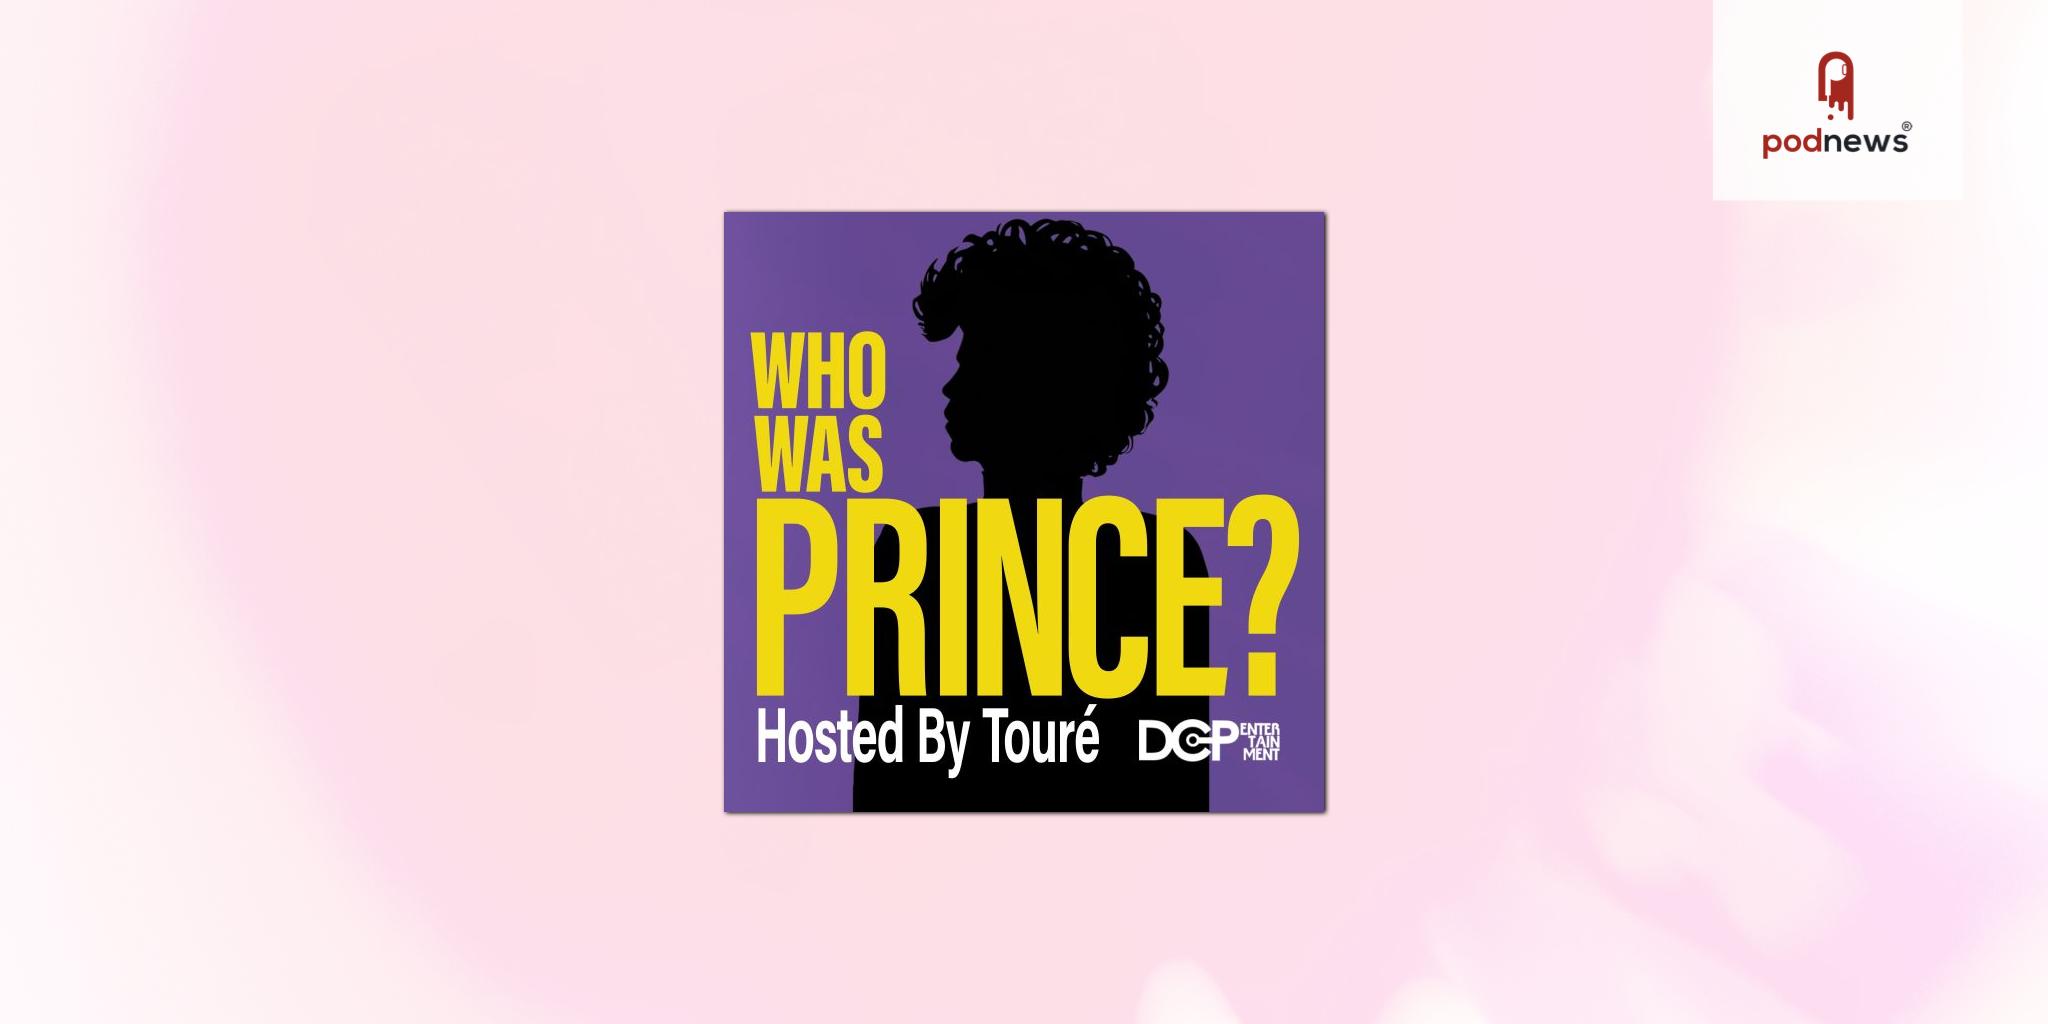 Cumulus Media and DCP Entertainment launch: Who Was Prince?